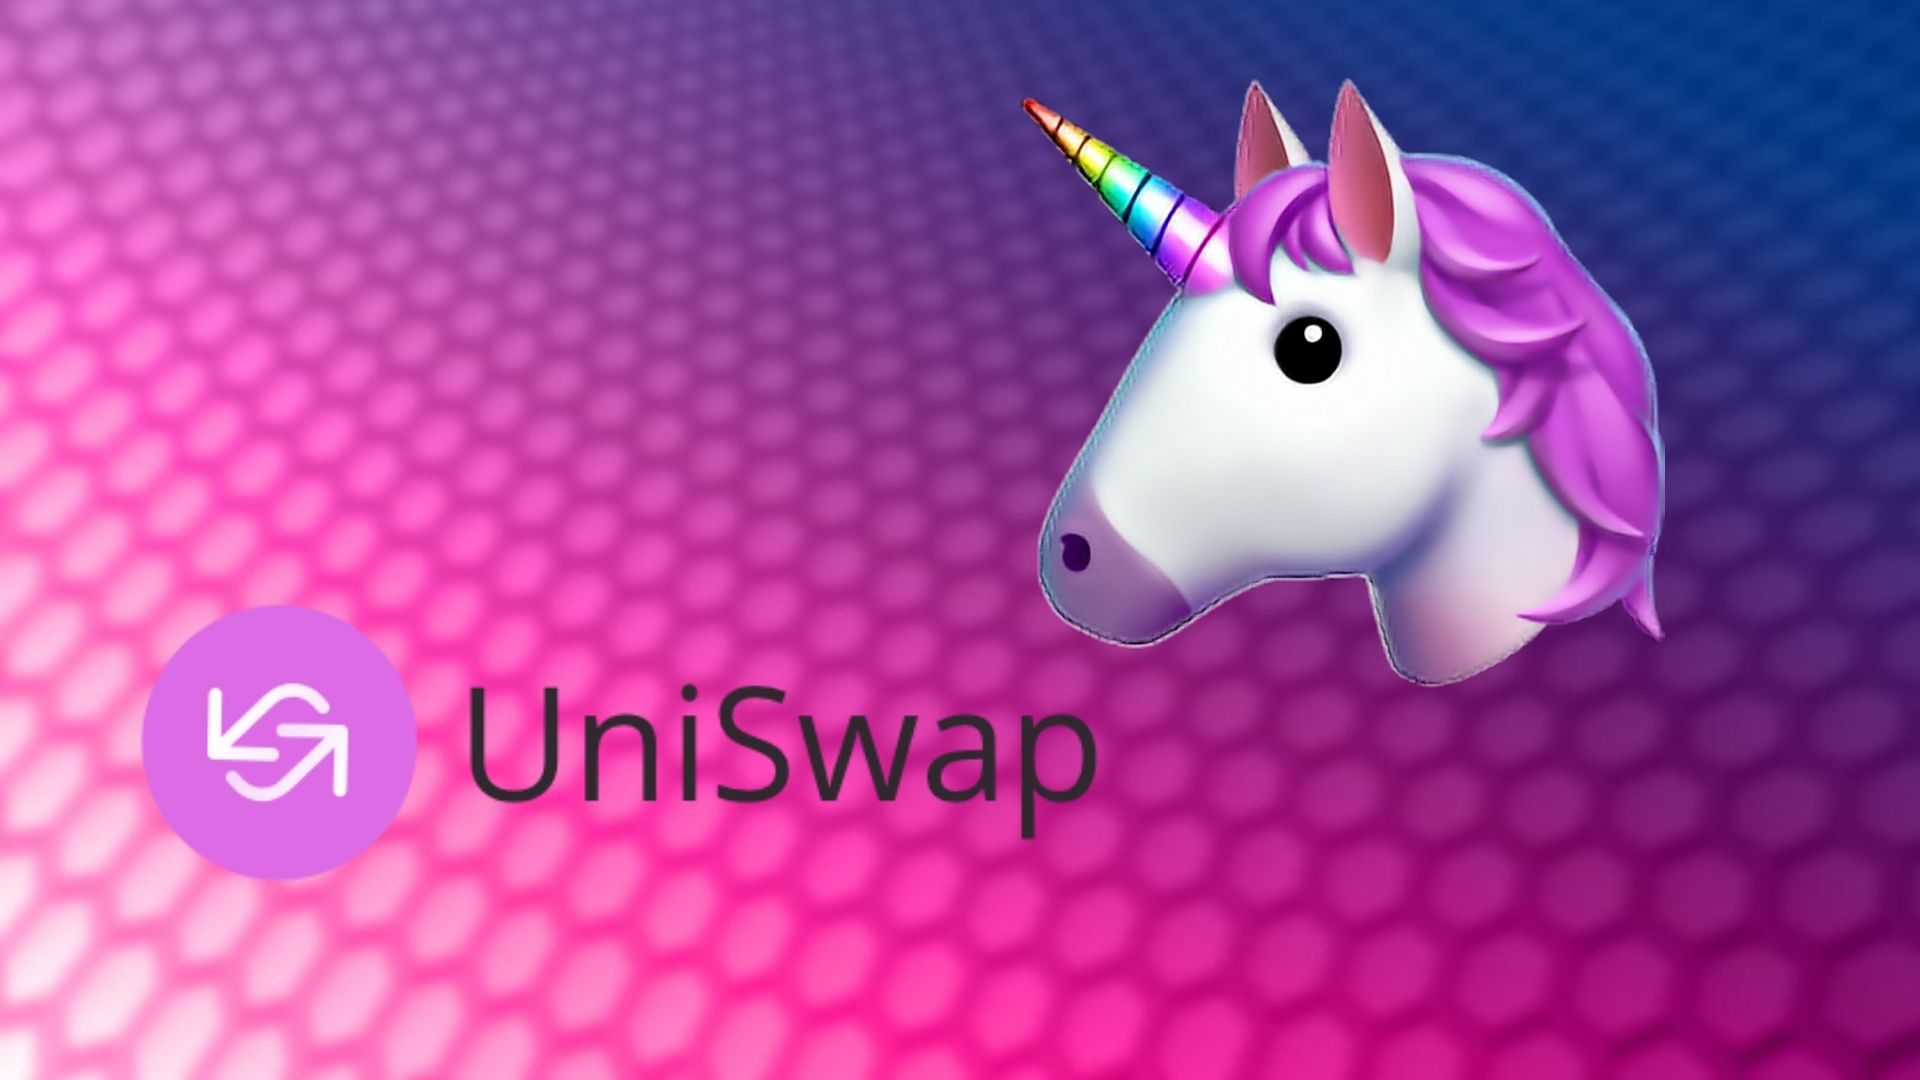 “Hacking” Uniswap's $UNI Airdrop, This is how to get free 400 UNI